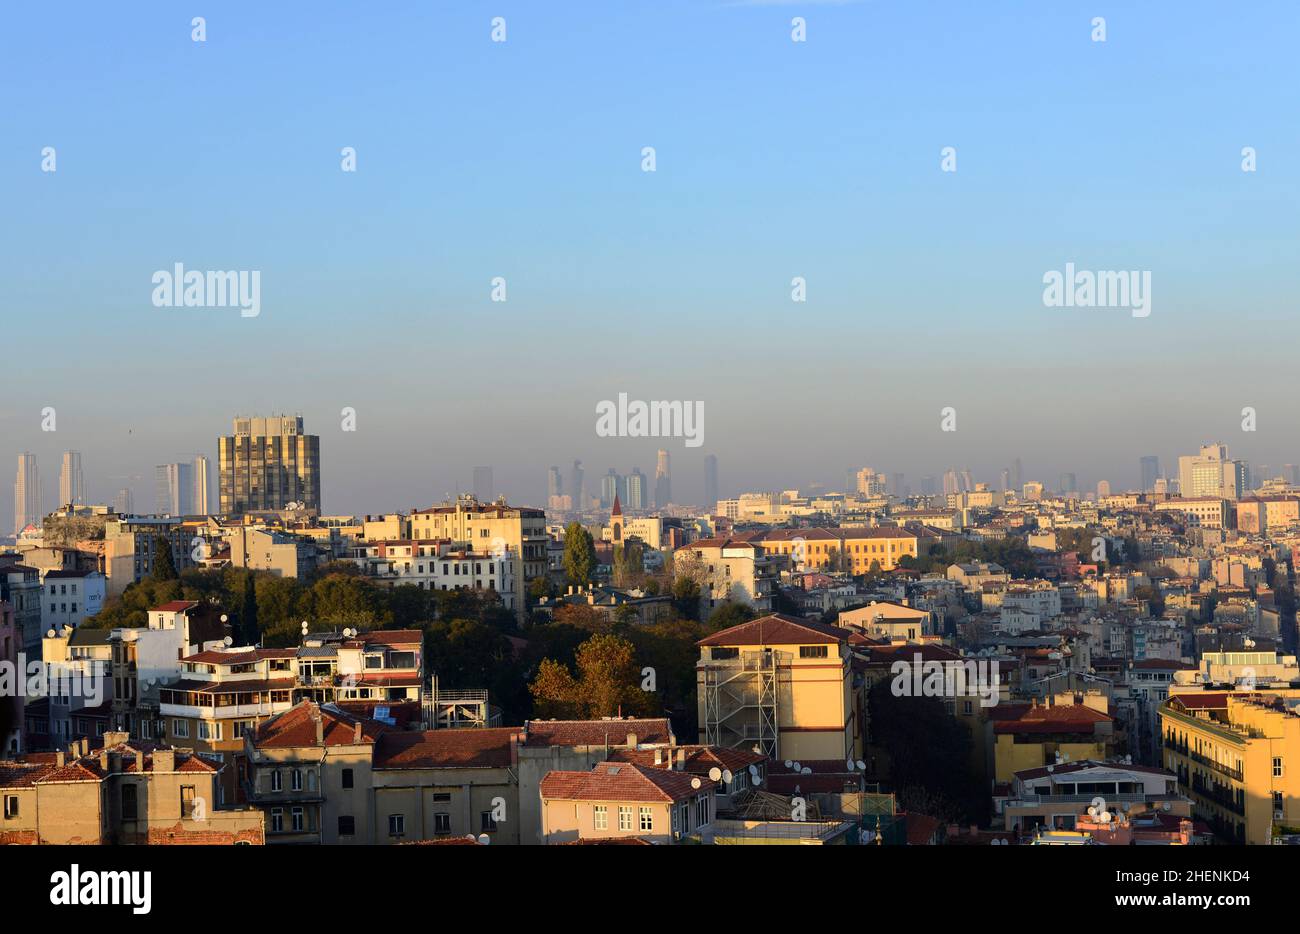 Older neighborhoods with modern buildings in the Levent district in Istanbul, Turkey. Stock Photo